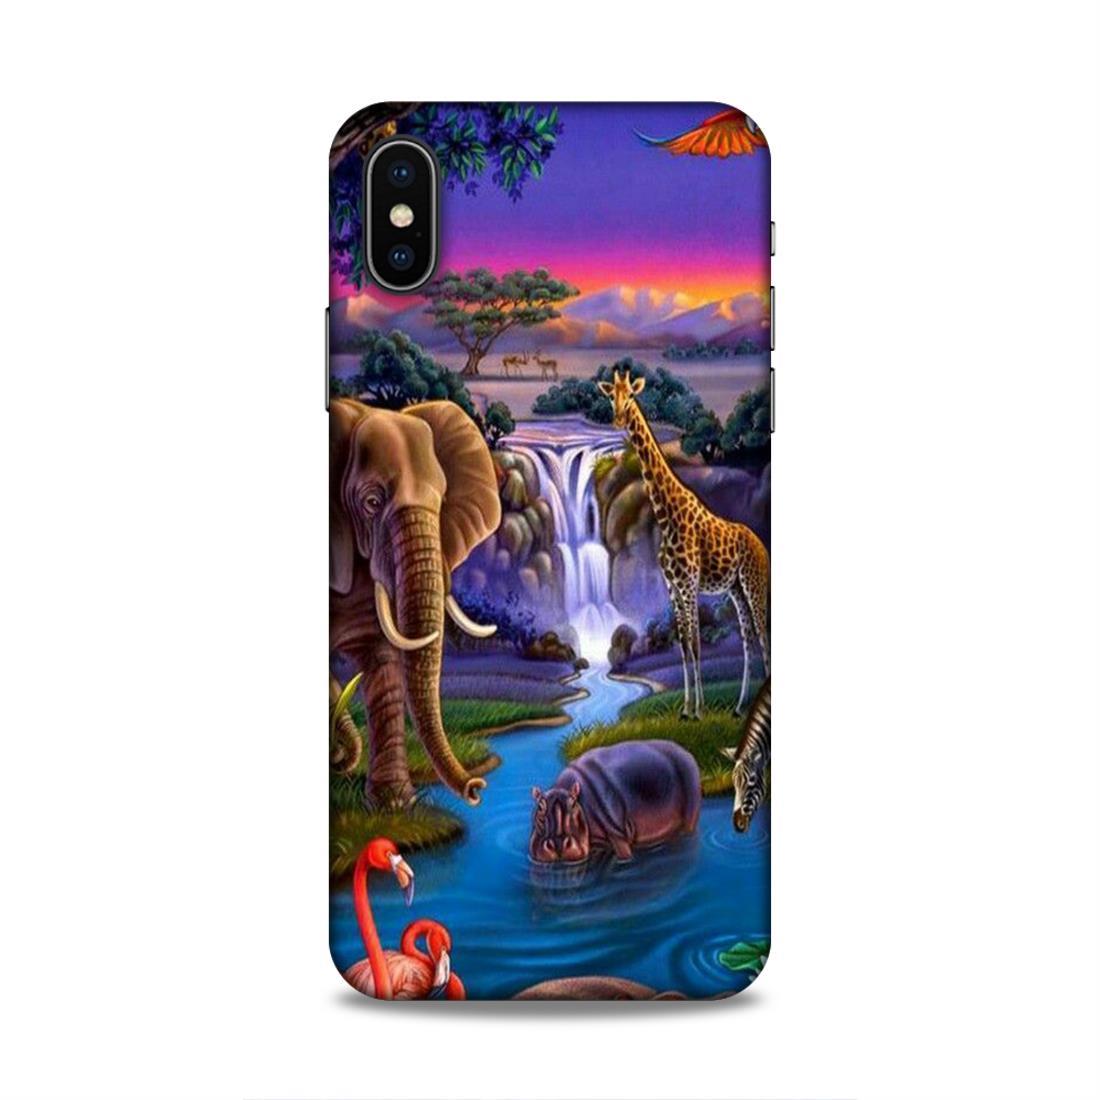 Jungle Art iPhone XS Mobile Cover